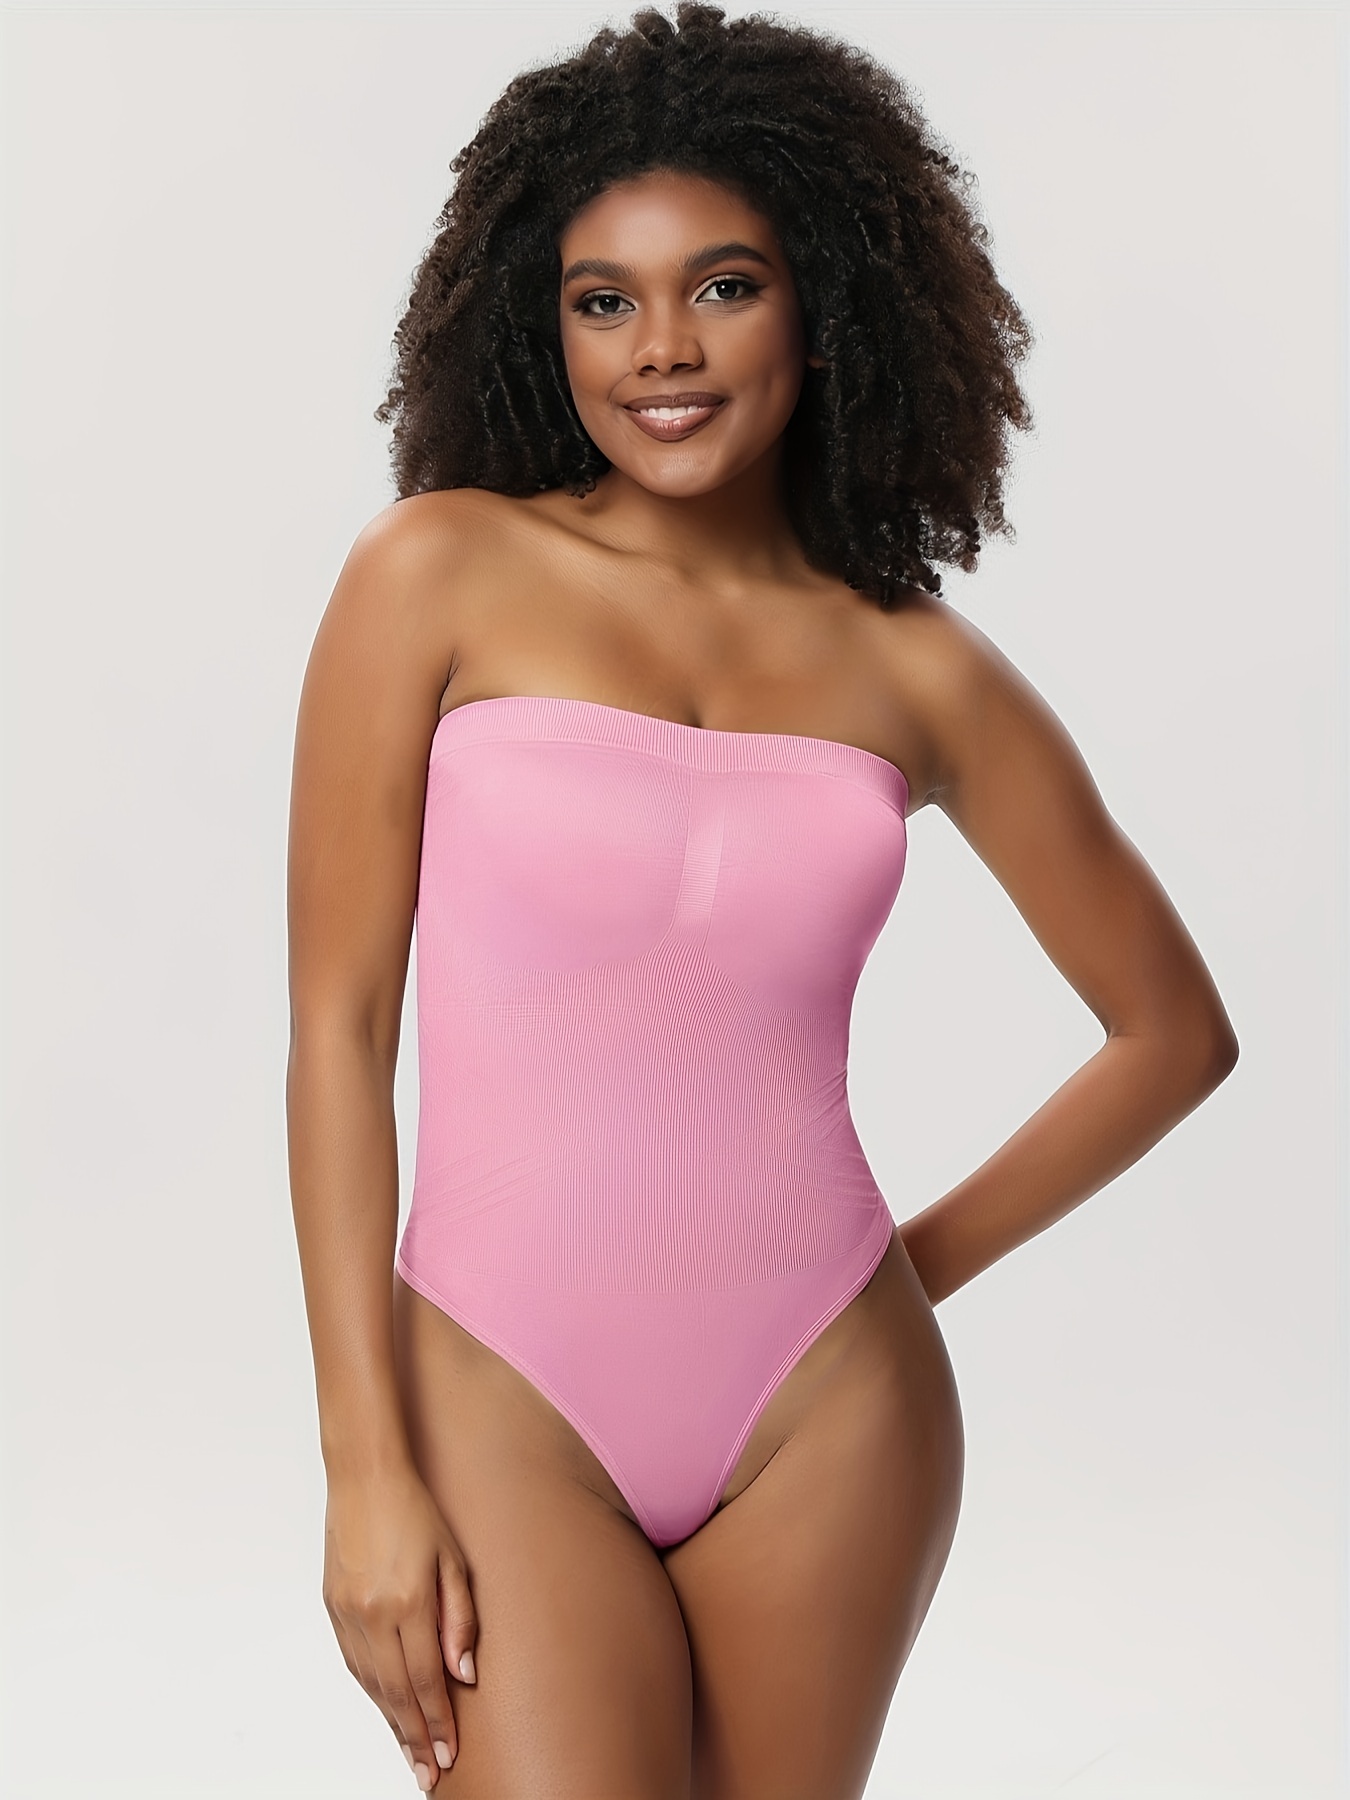 Women's One-Piece Slimming, Shaping & Tummy Control Swimsuits